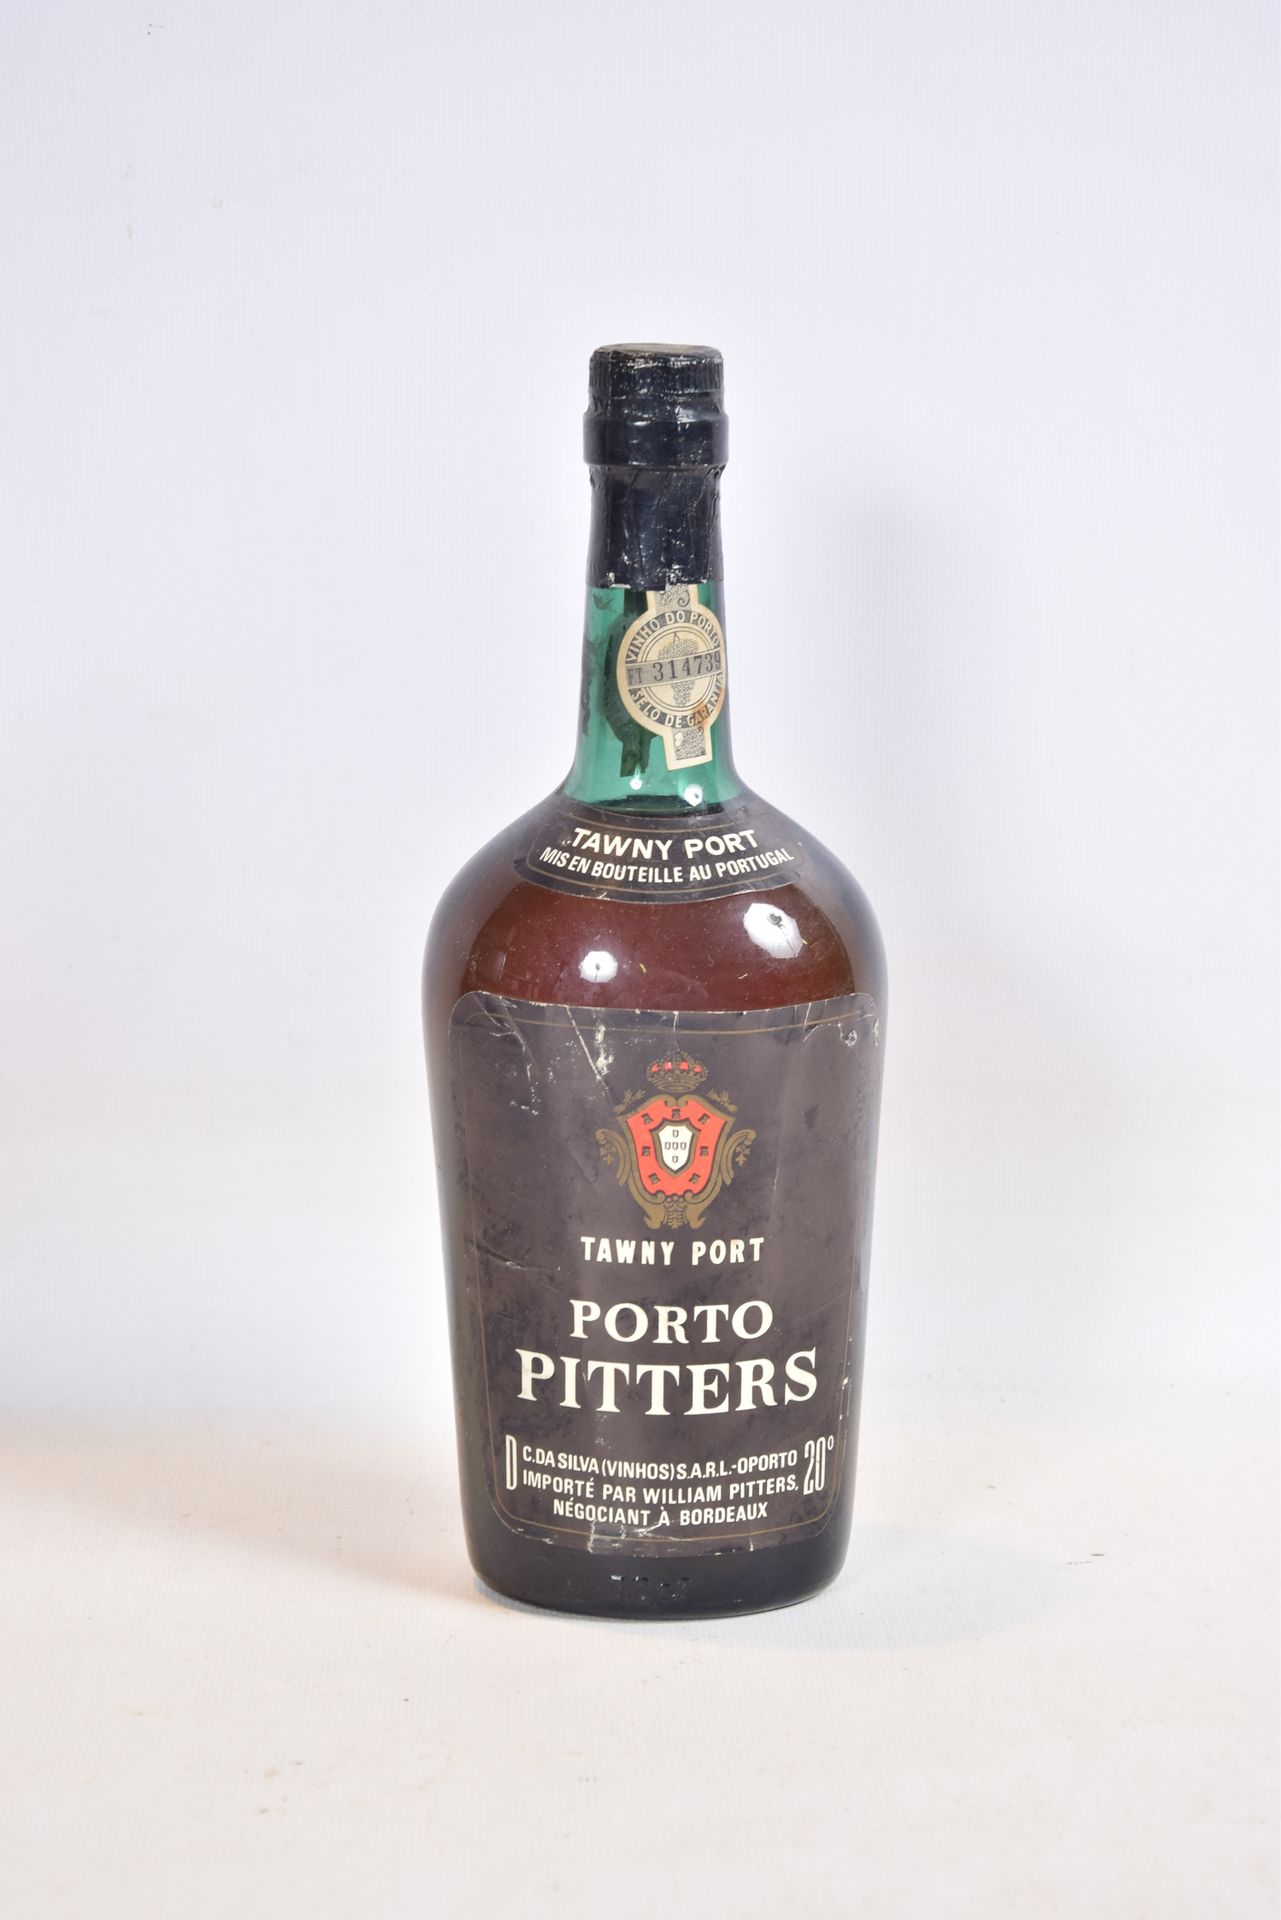 Null 1 Blle Port PITTERS Tawny Port

	70 cl - 20°. And. A little faded. N: low n&hellip;